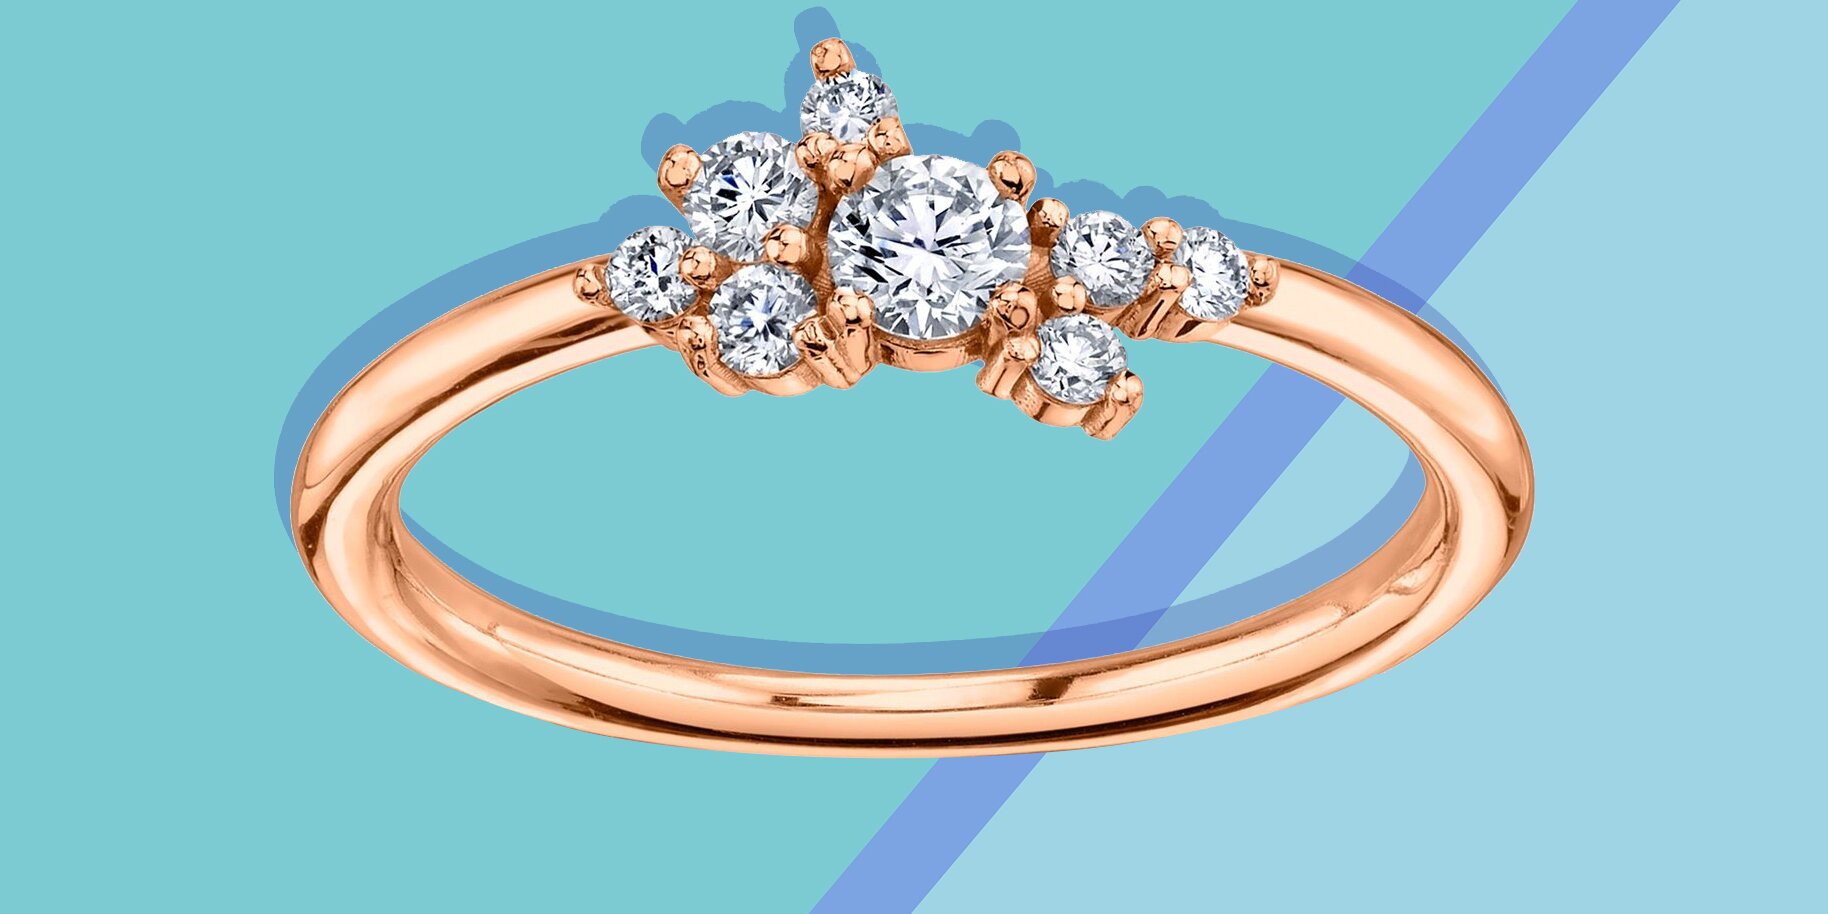 Buy Diamond Rings that Suit her Personality